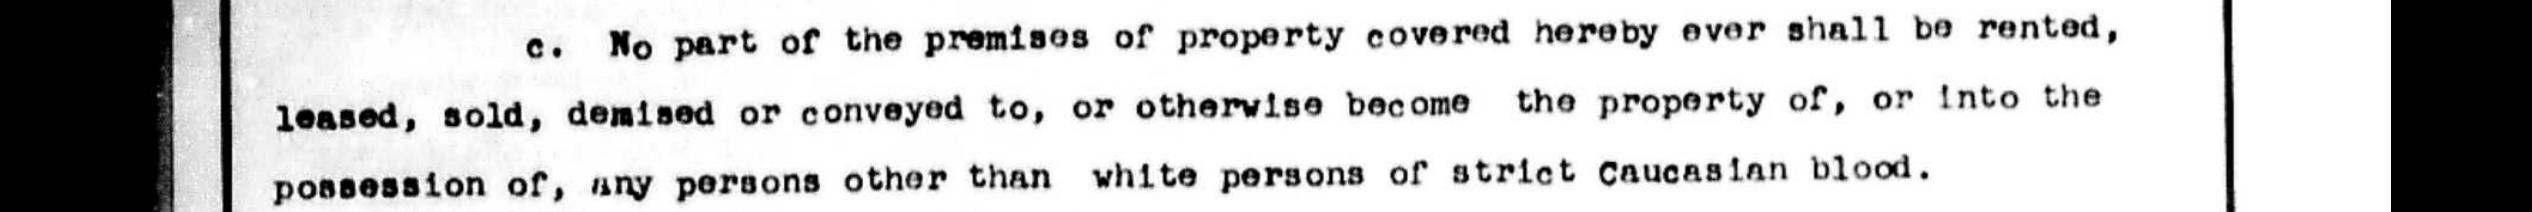 An excerpt of a deed restriction that reads “No part of the premises of property covered hereby ever shall be rented, leased, sold, demised or conveyed to, or otherwise become the property of, or into the possession of, any persons other than white persons of strict Caucasian blood.”